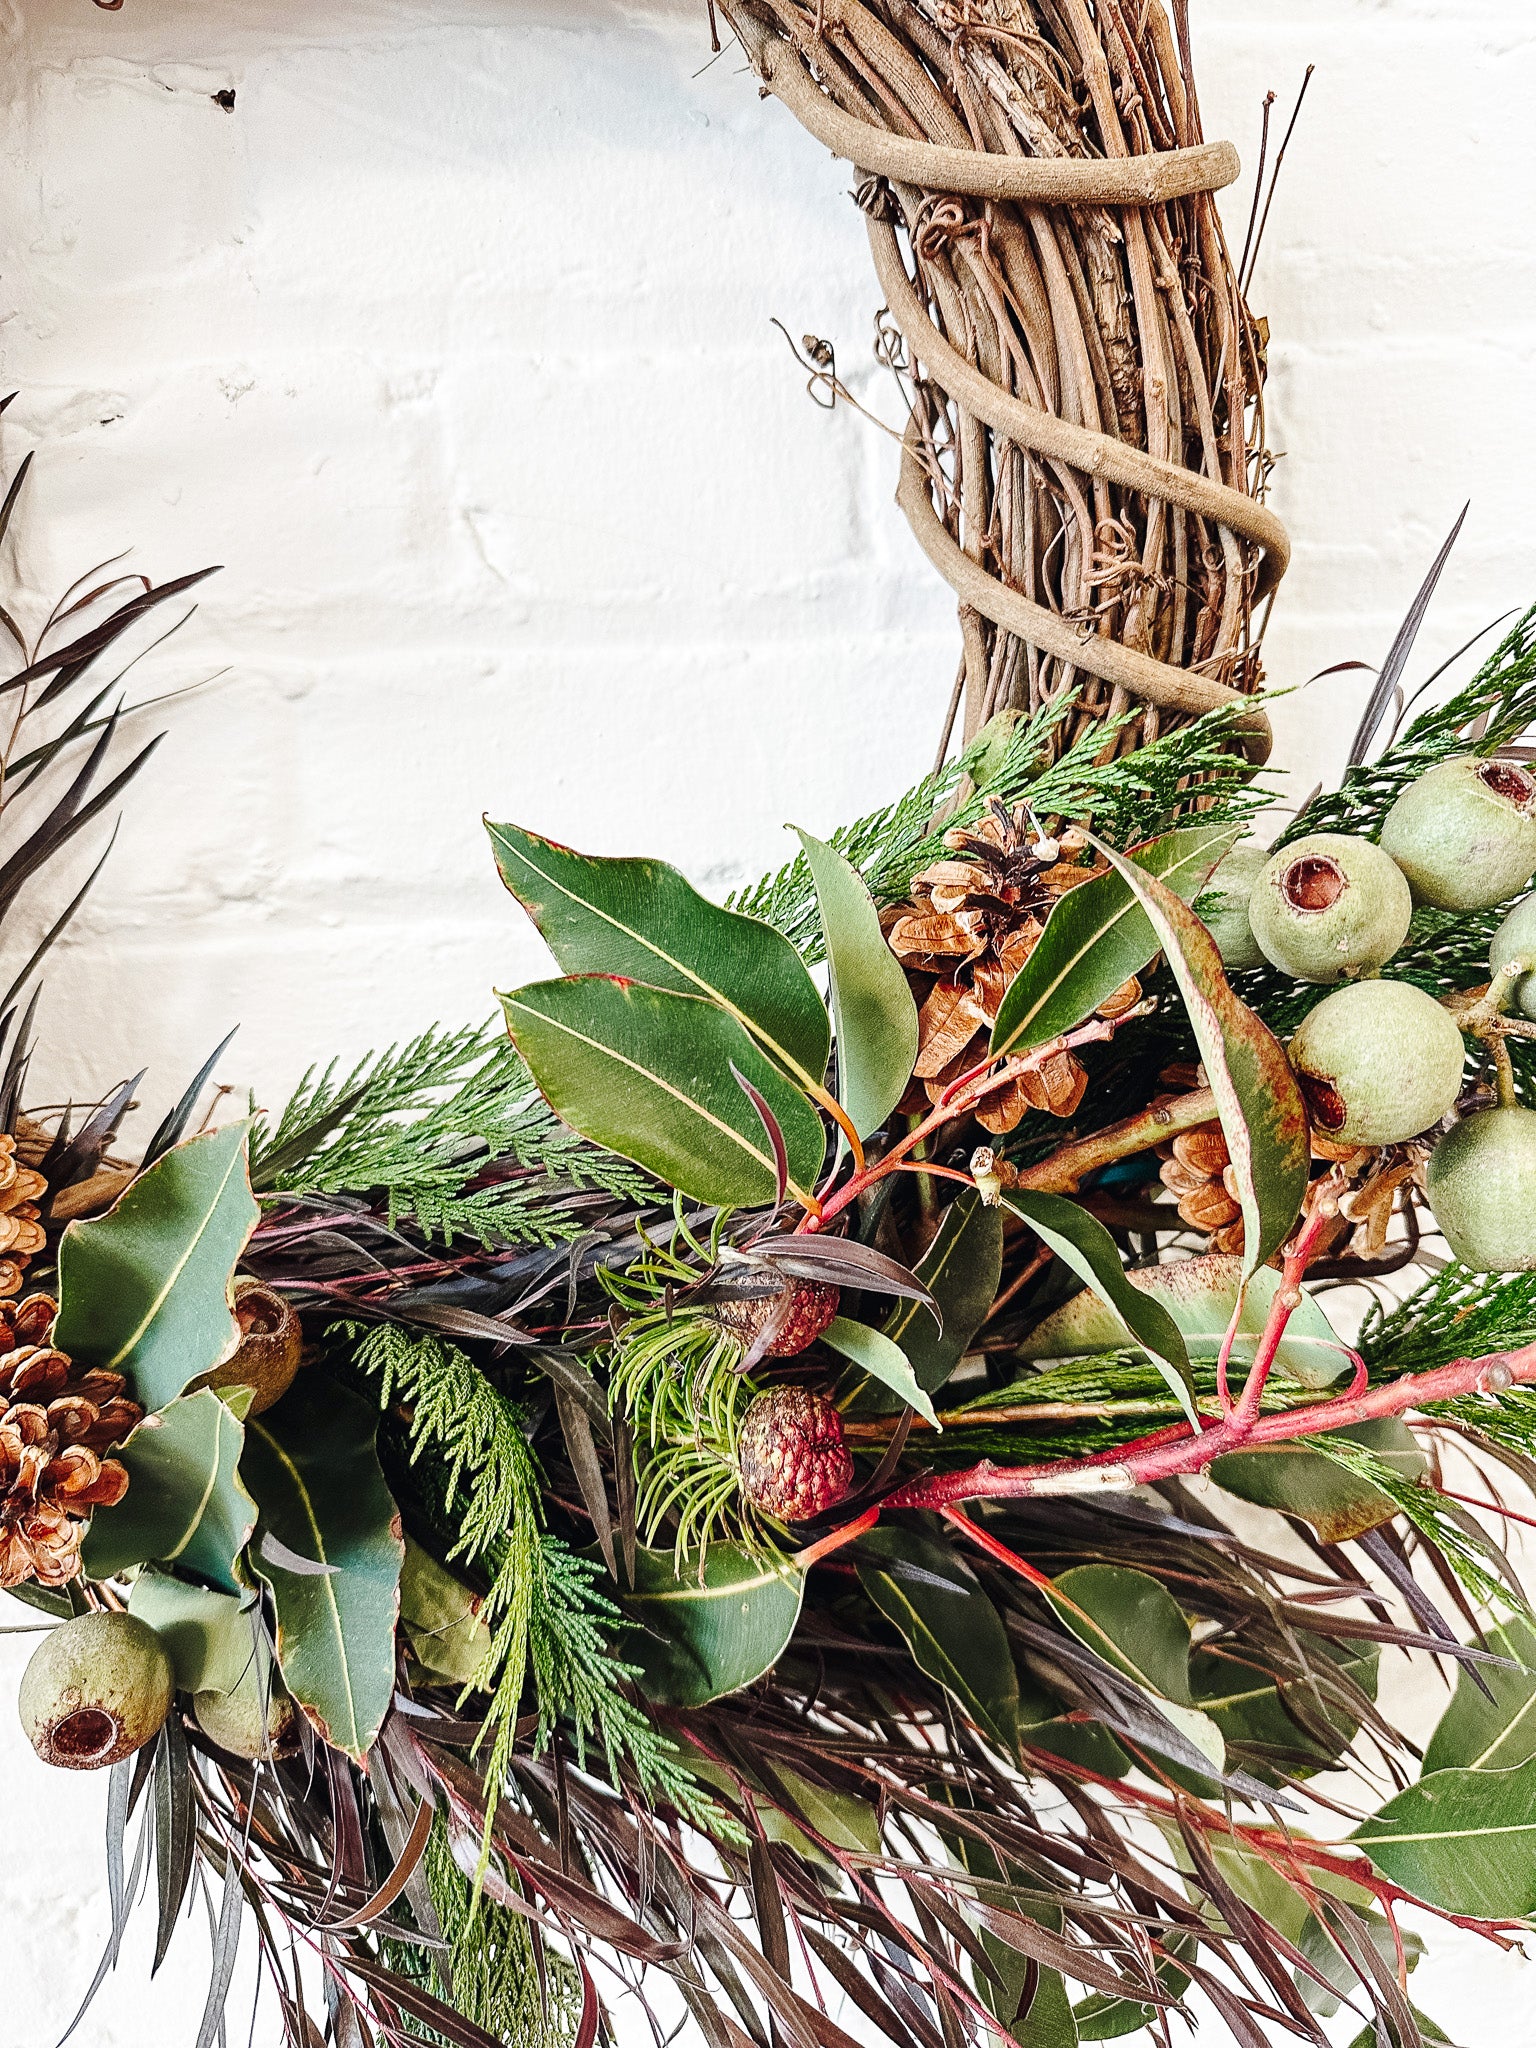 Winter greens on birch wreath with textural foliage and pod elements 